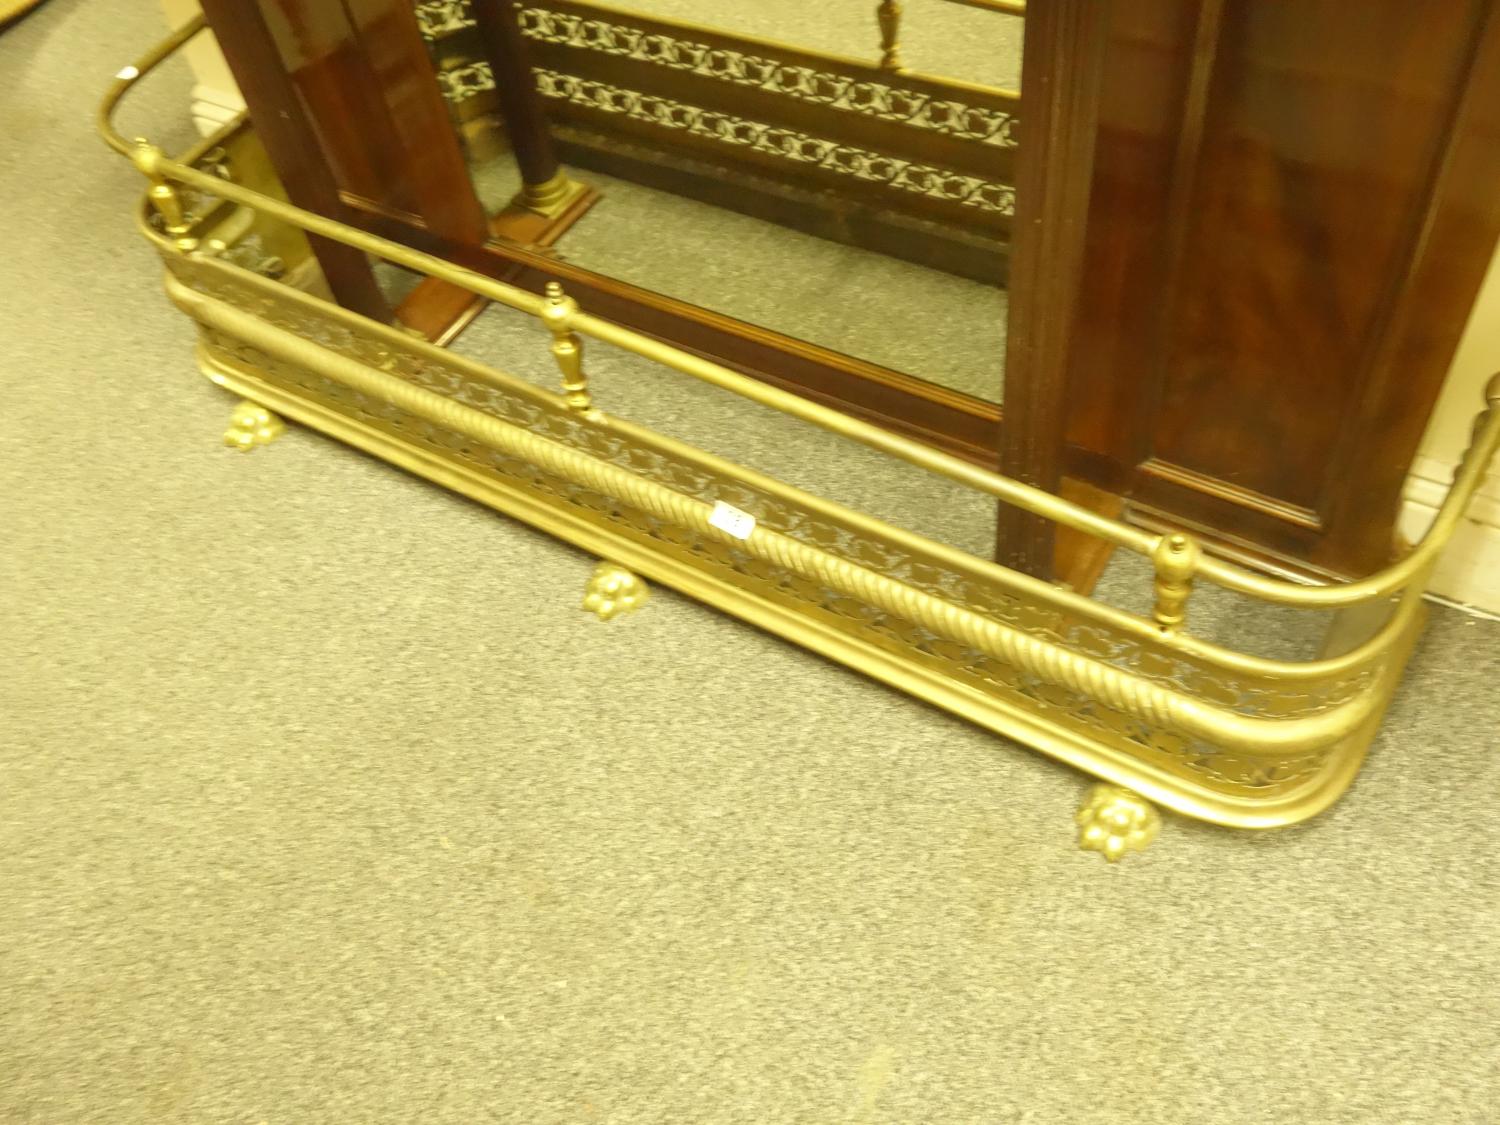 Decorative pierced brass fire front, with lion paw supports, 5' long with a galleried top